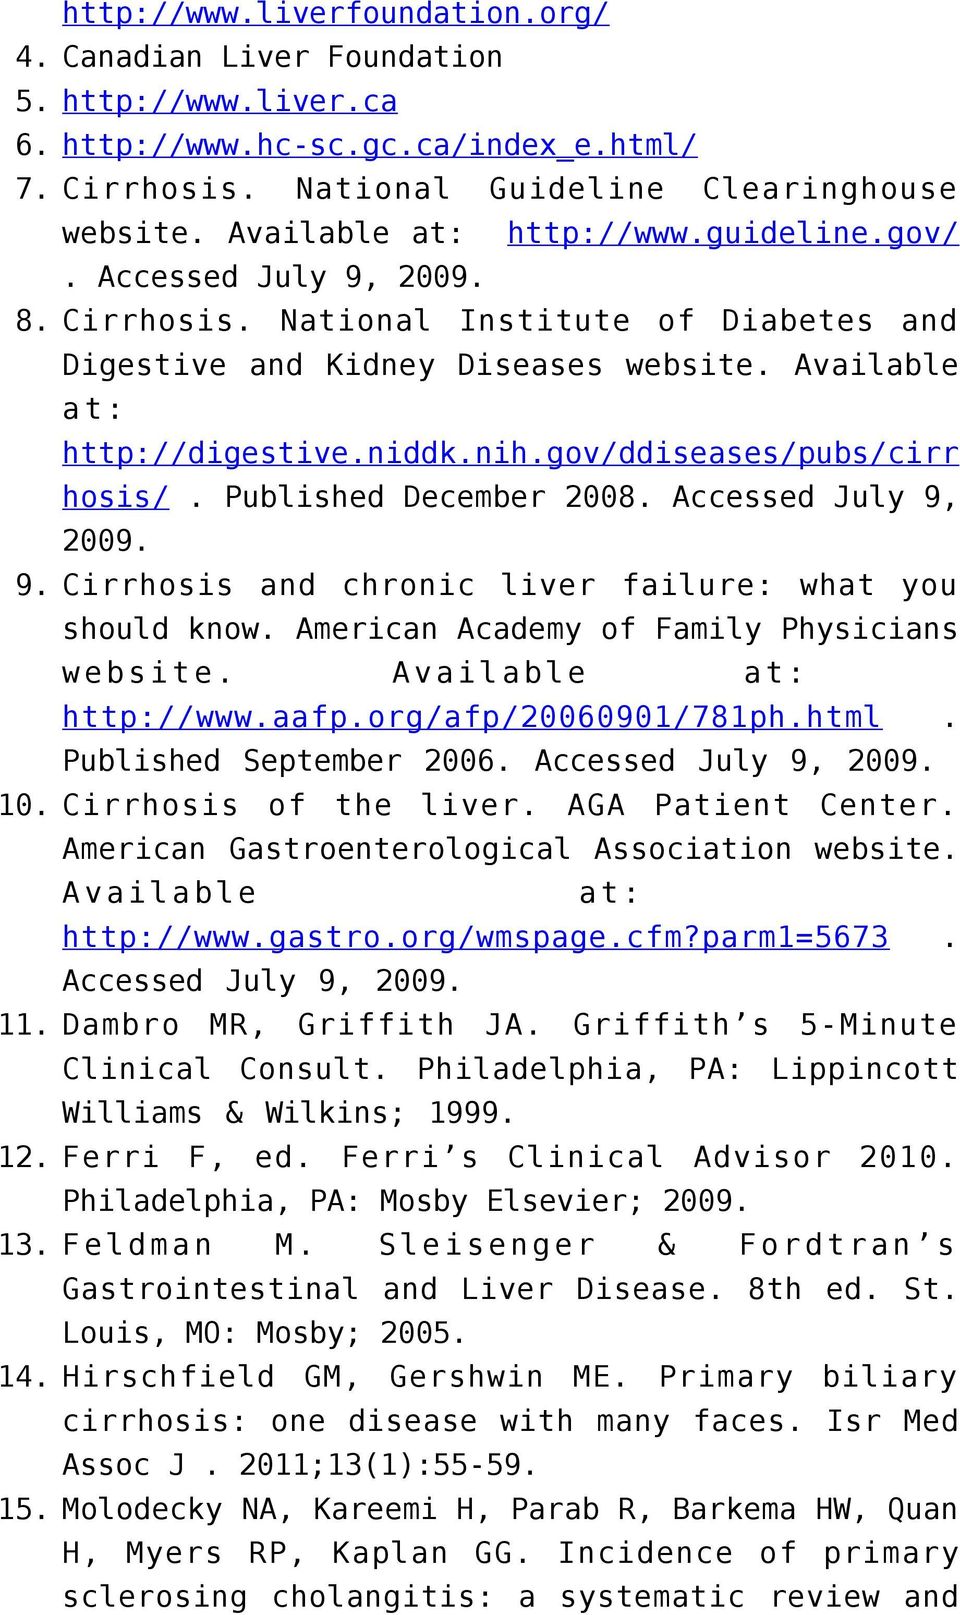 gov/ddiseases/pubs/cirr hosis/. Published December 2008. Accessed July 9, 2009. 9. Cirrhosis and chronic liver failure: what you should know. American Academy of Family Physicians website.